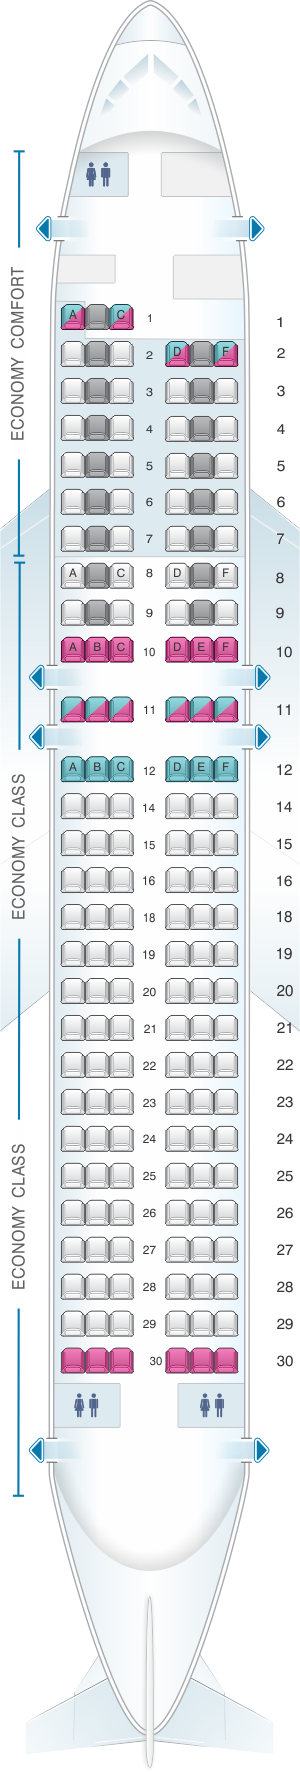 Seat map for Alitalia Airlines - Air One Airbus A320